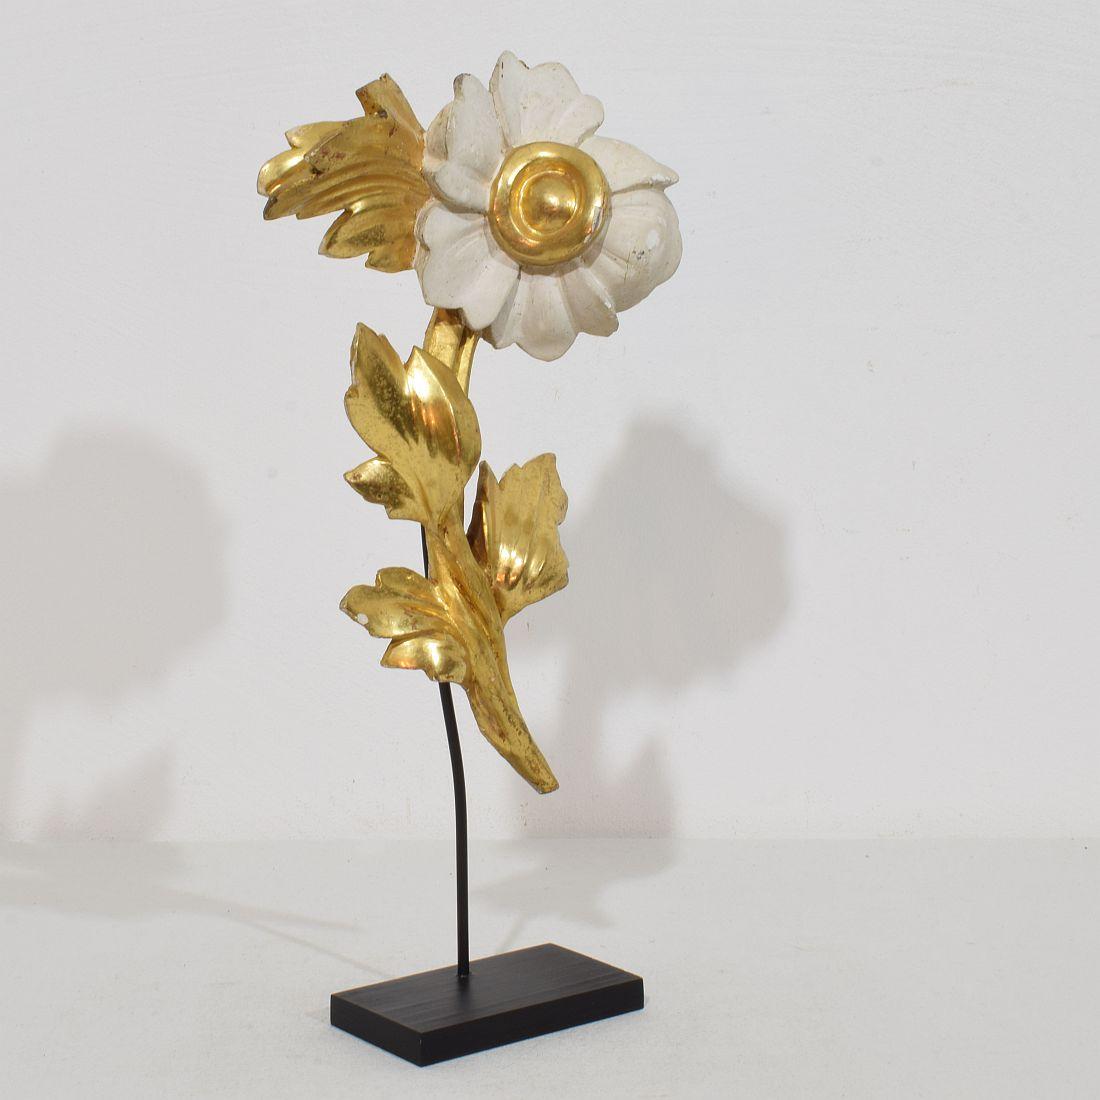 Hand-Carved Italian 18/19th Century Hand Carved Giltwood Floral Ornament For Sale